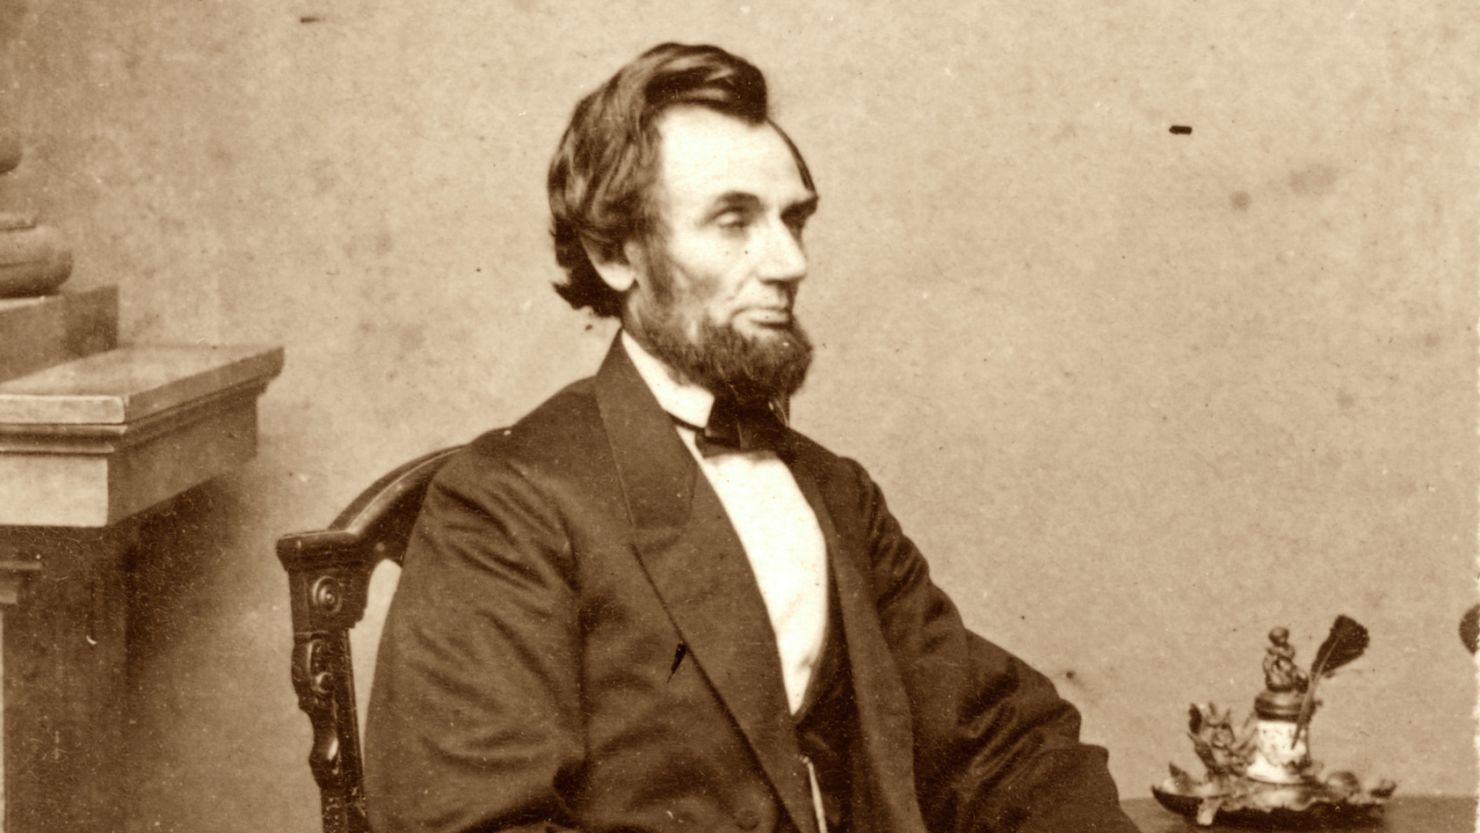 President Abraham Lincoln poses for a portrait next to a table in 1865.